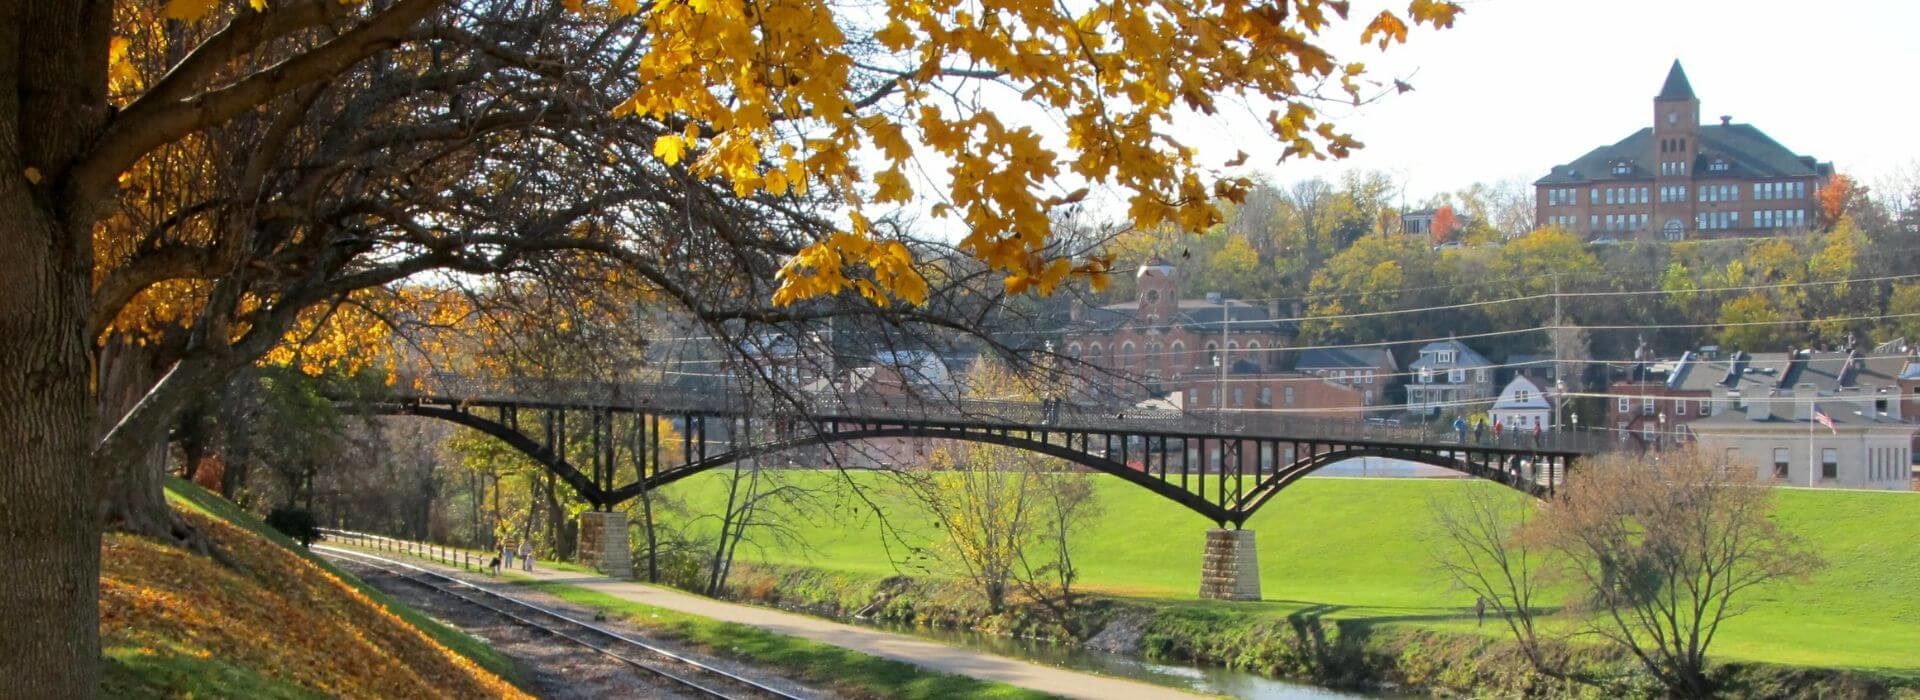 Landscape of green grass a river, a bridge, and a tree with fall foliage, and buildings in the background